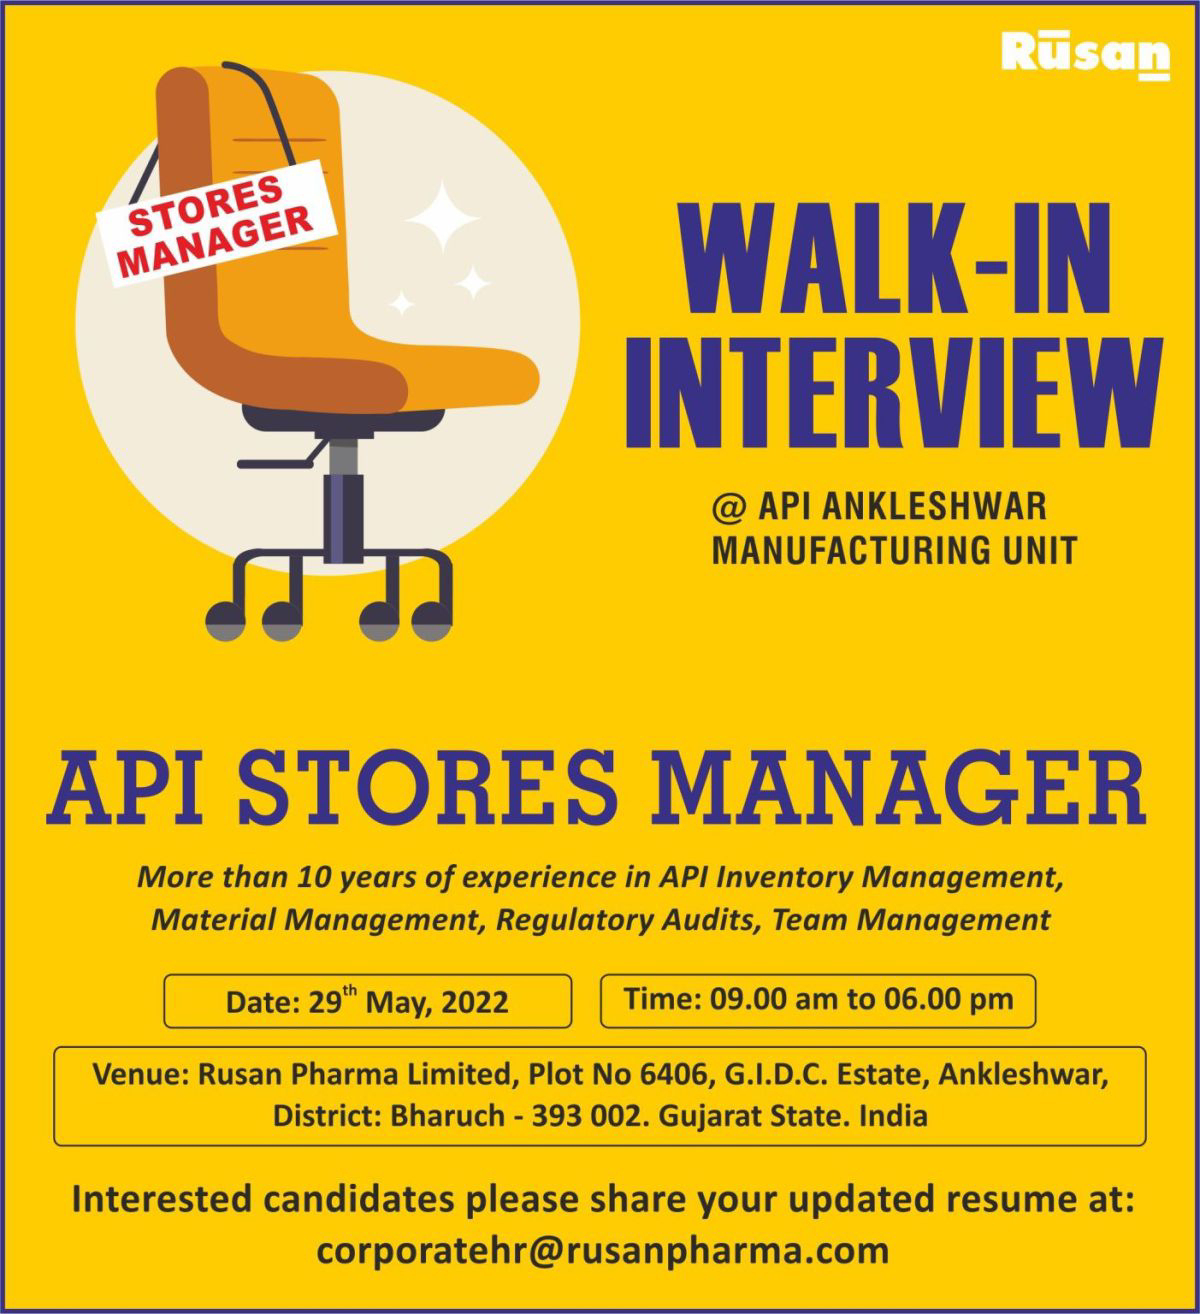 Job Available for Rusan Pharmaceutical Ltd Walk-In Interview for API Stores Manager